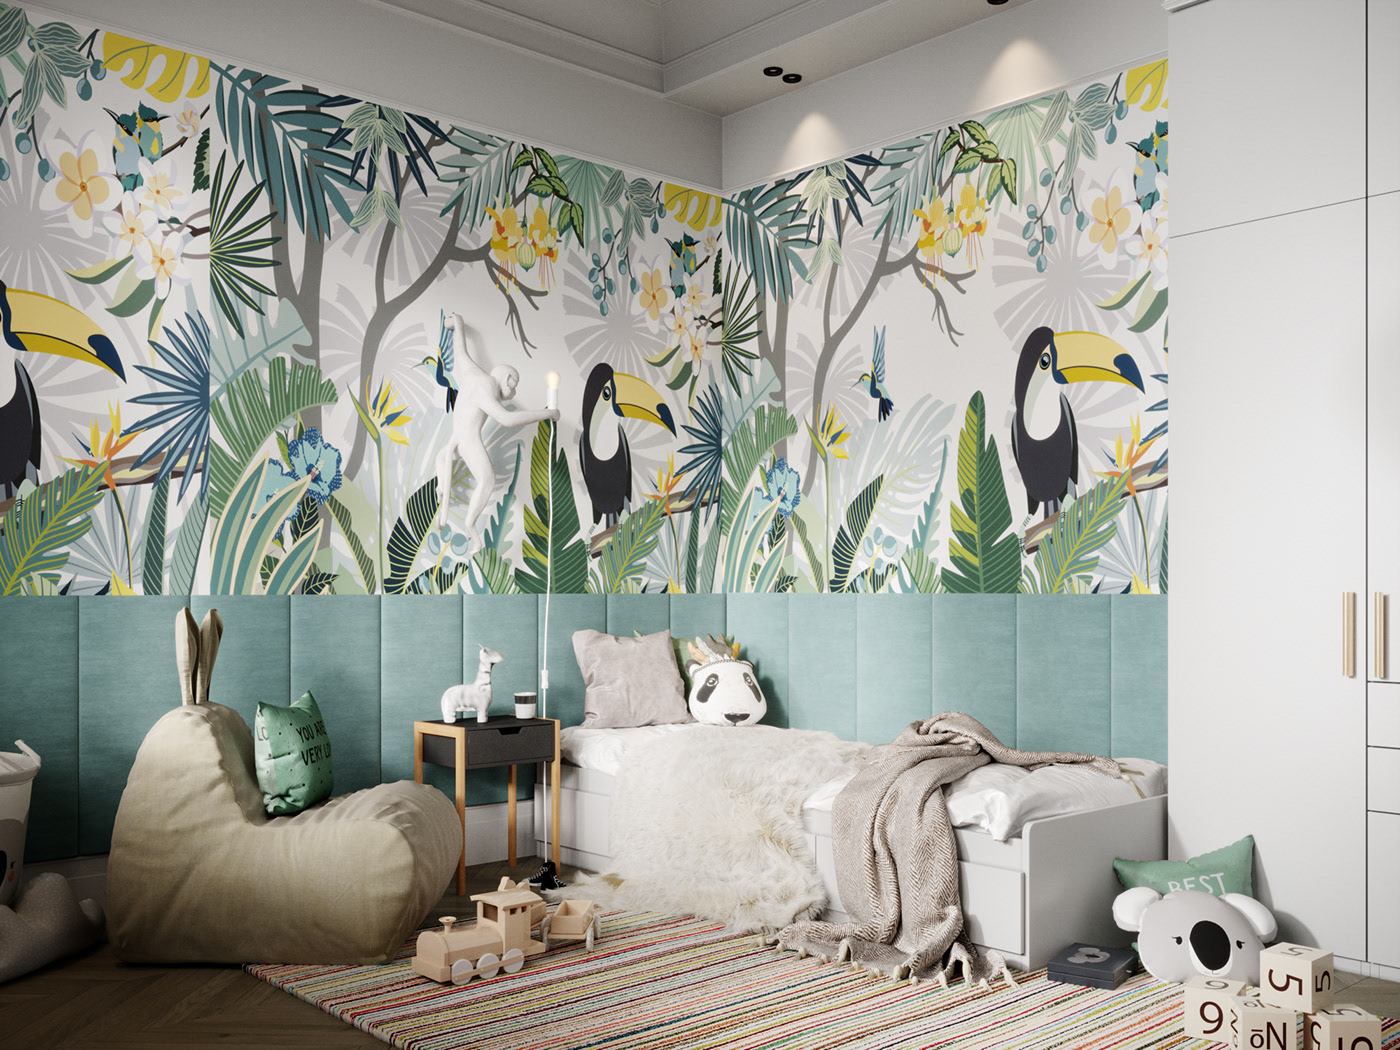 Animal-shaped wall paintings that are both funny and extremely beautiful help to make the bedroom space dynamic and full of creativity.